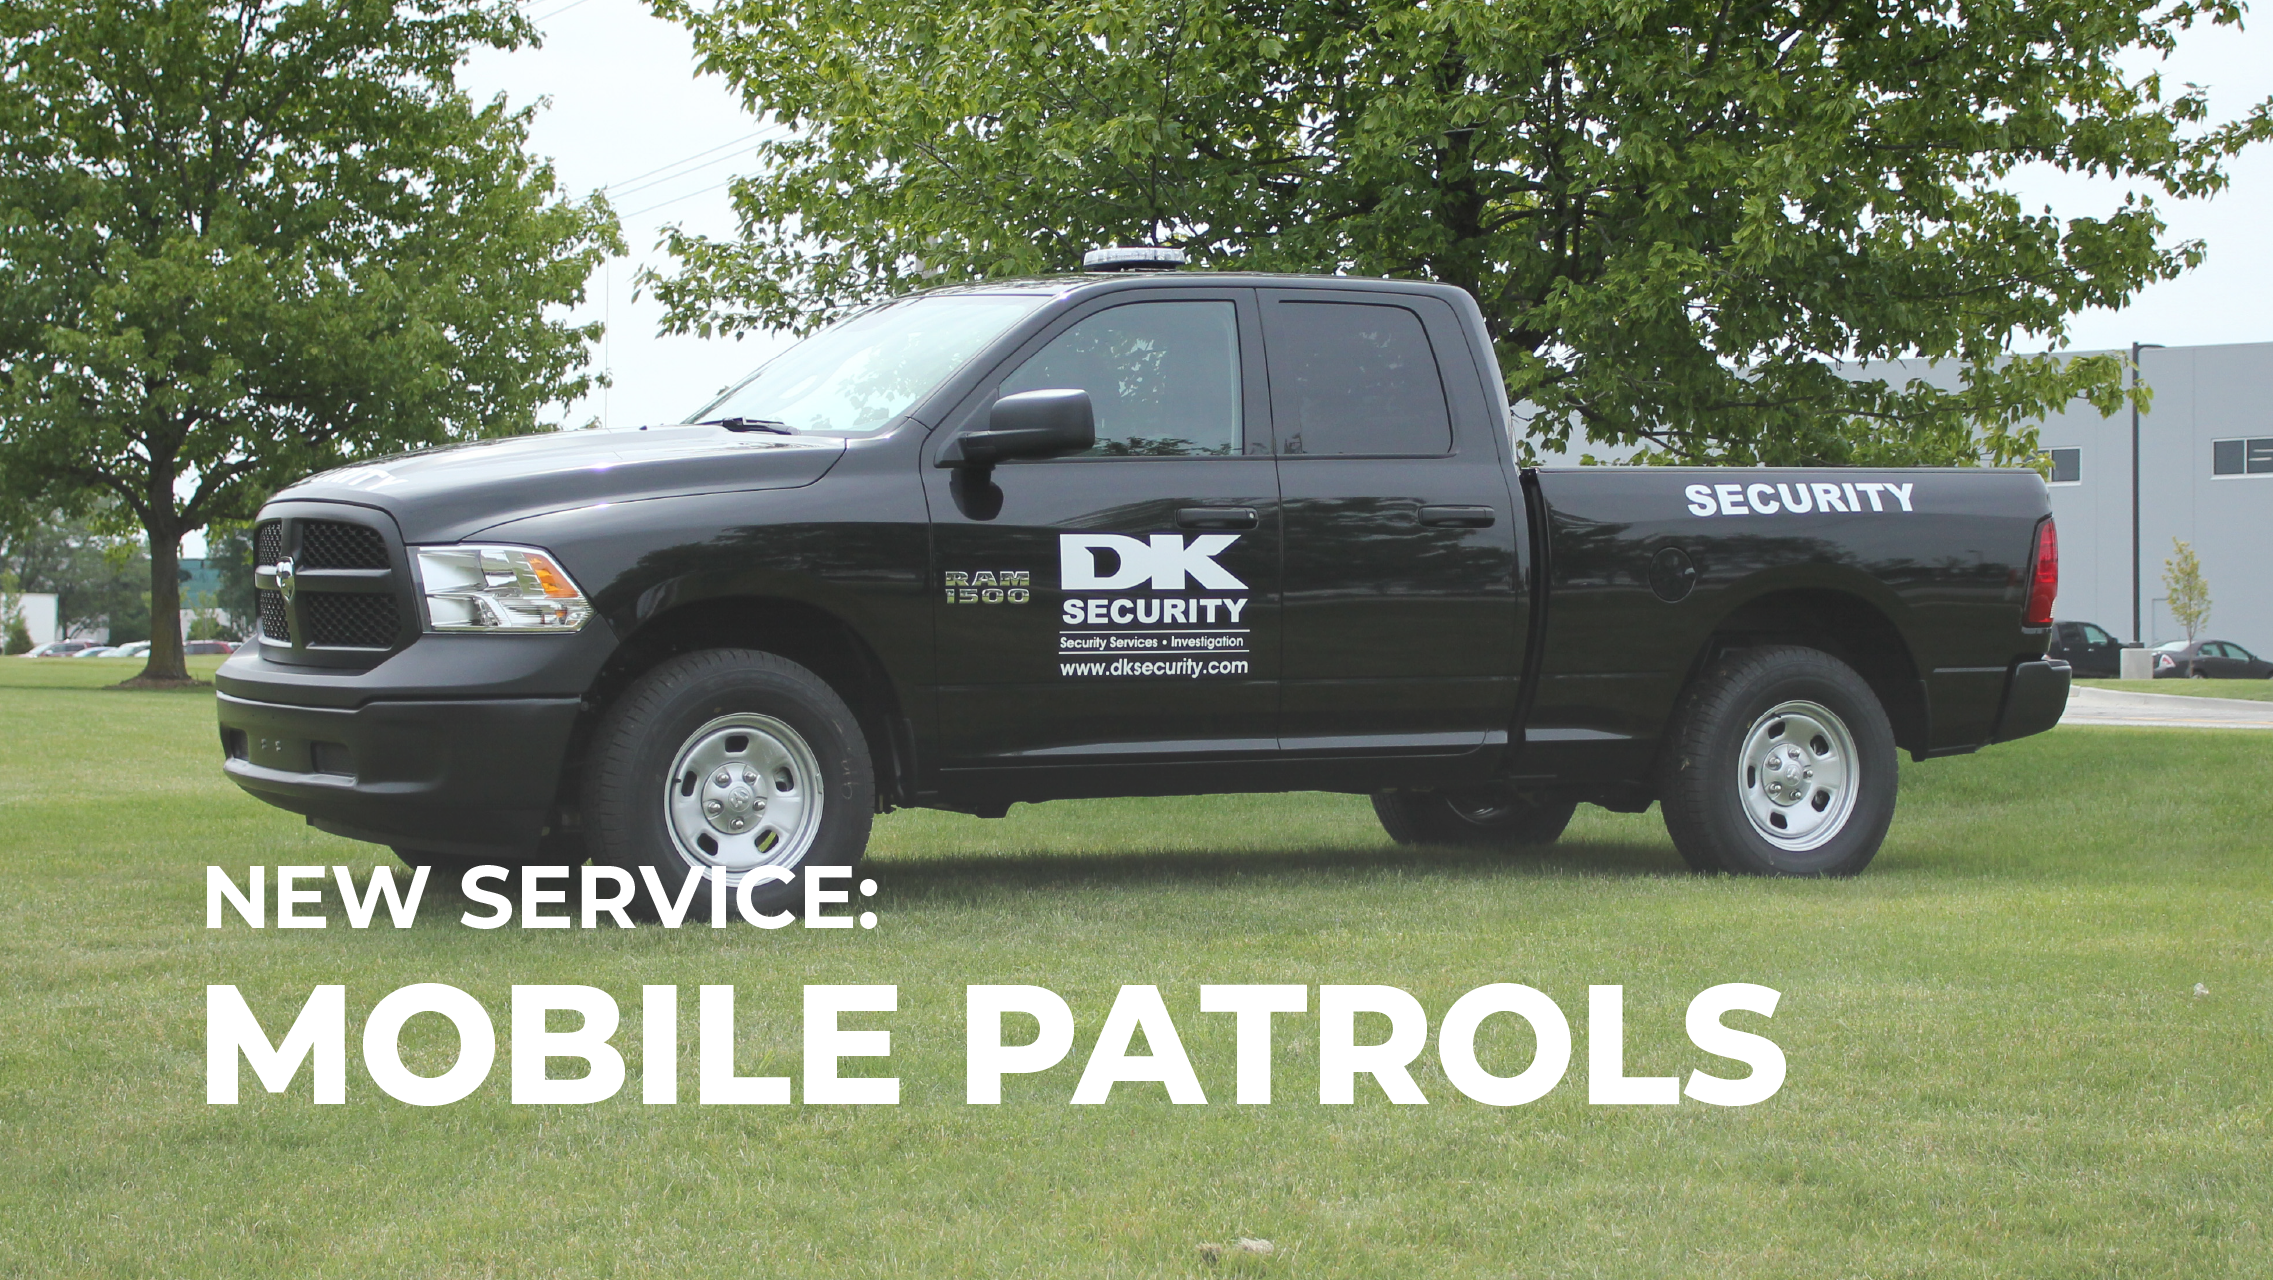 DK Security Introducing Our New Service Mobile Patrols